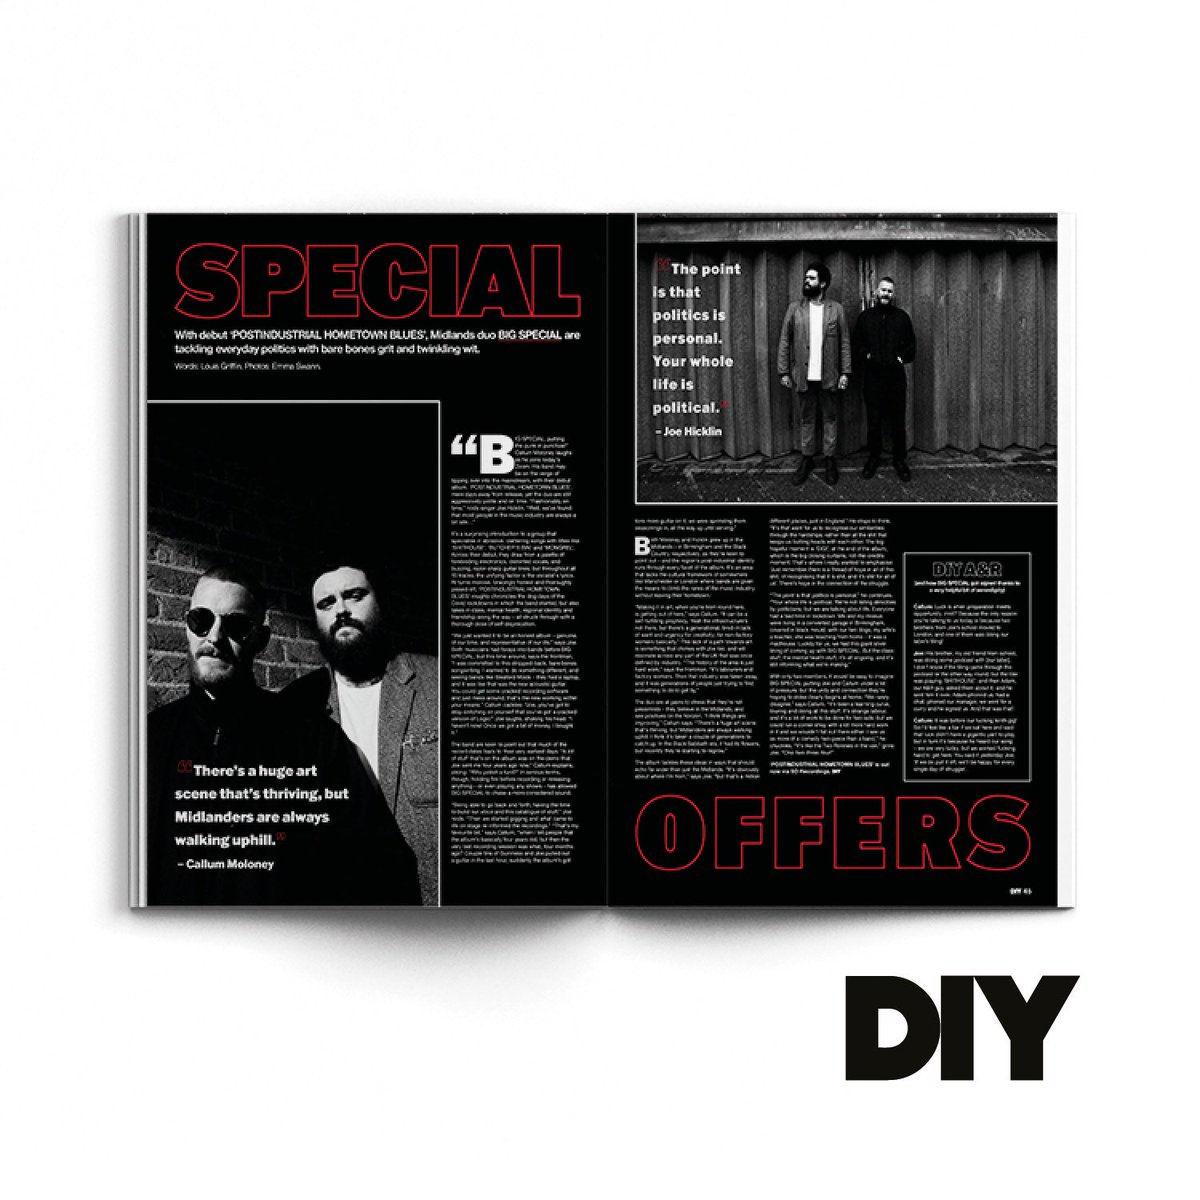 With their just-dropped debut ‘POSTINDUSTRIAL HOMETOWN BLUES’, Midlands duo @BIGSPECIAL_ are tackling everyday politics with bare bones grit and twinkling wit. Read the full interview and grab a copy of the May print mag here: diymag.com/interview/big-…